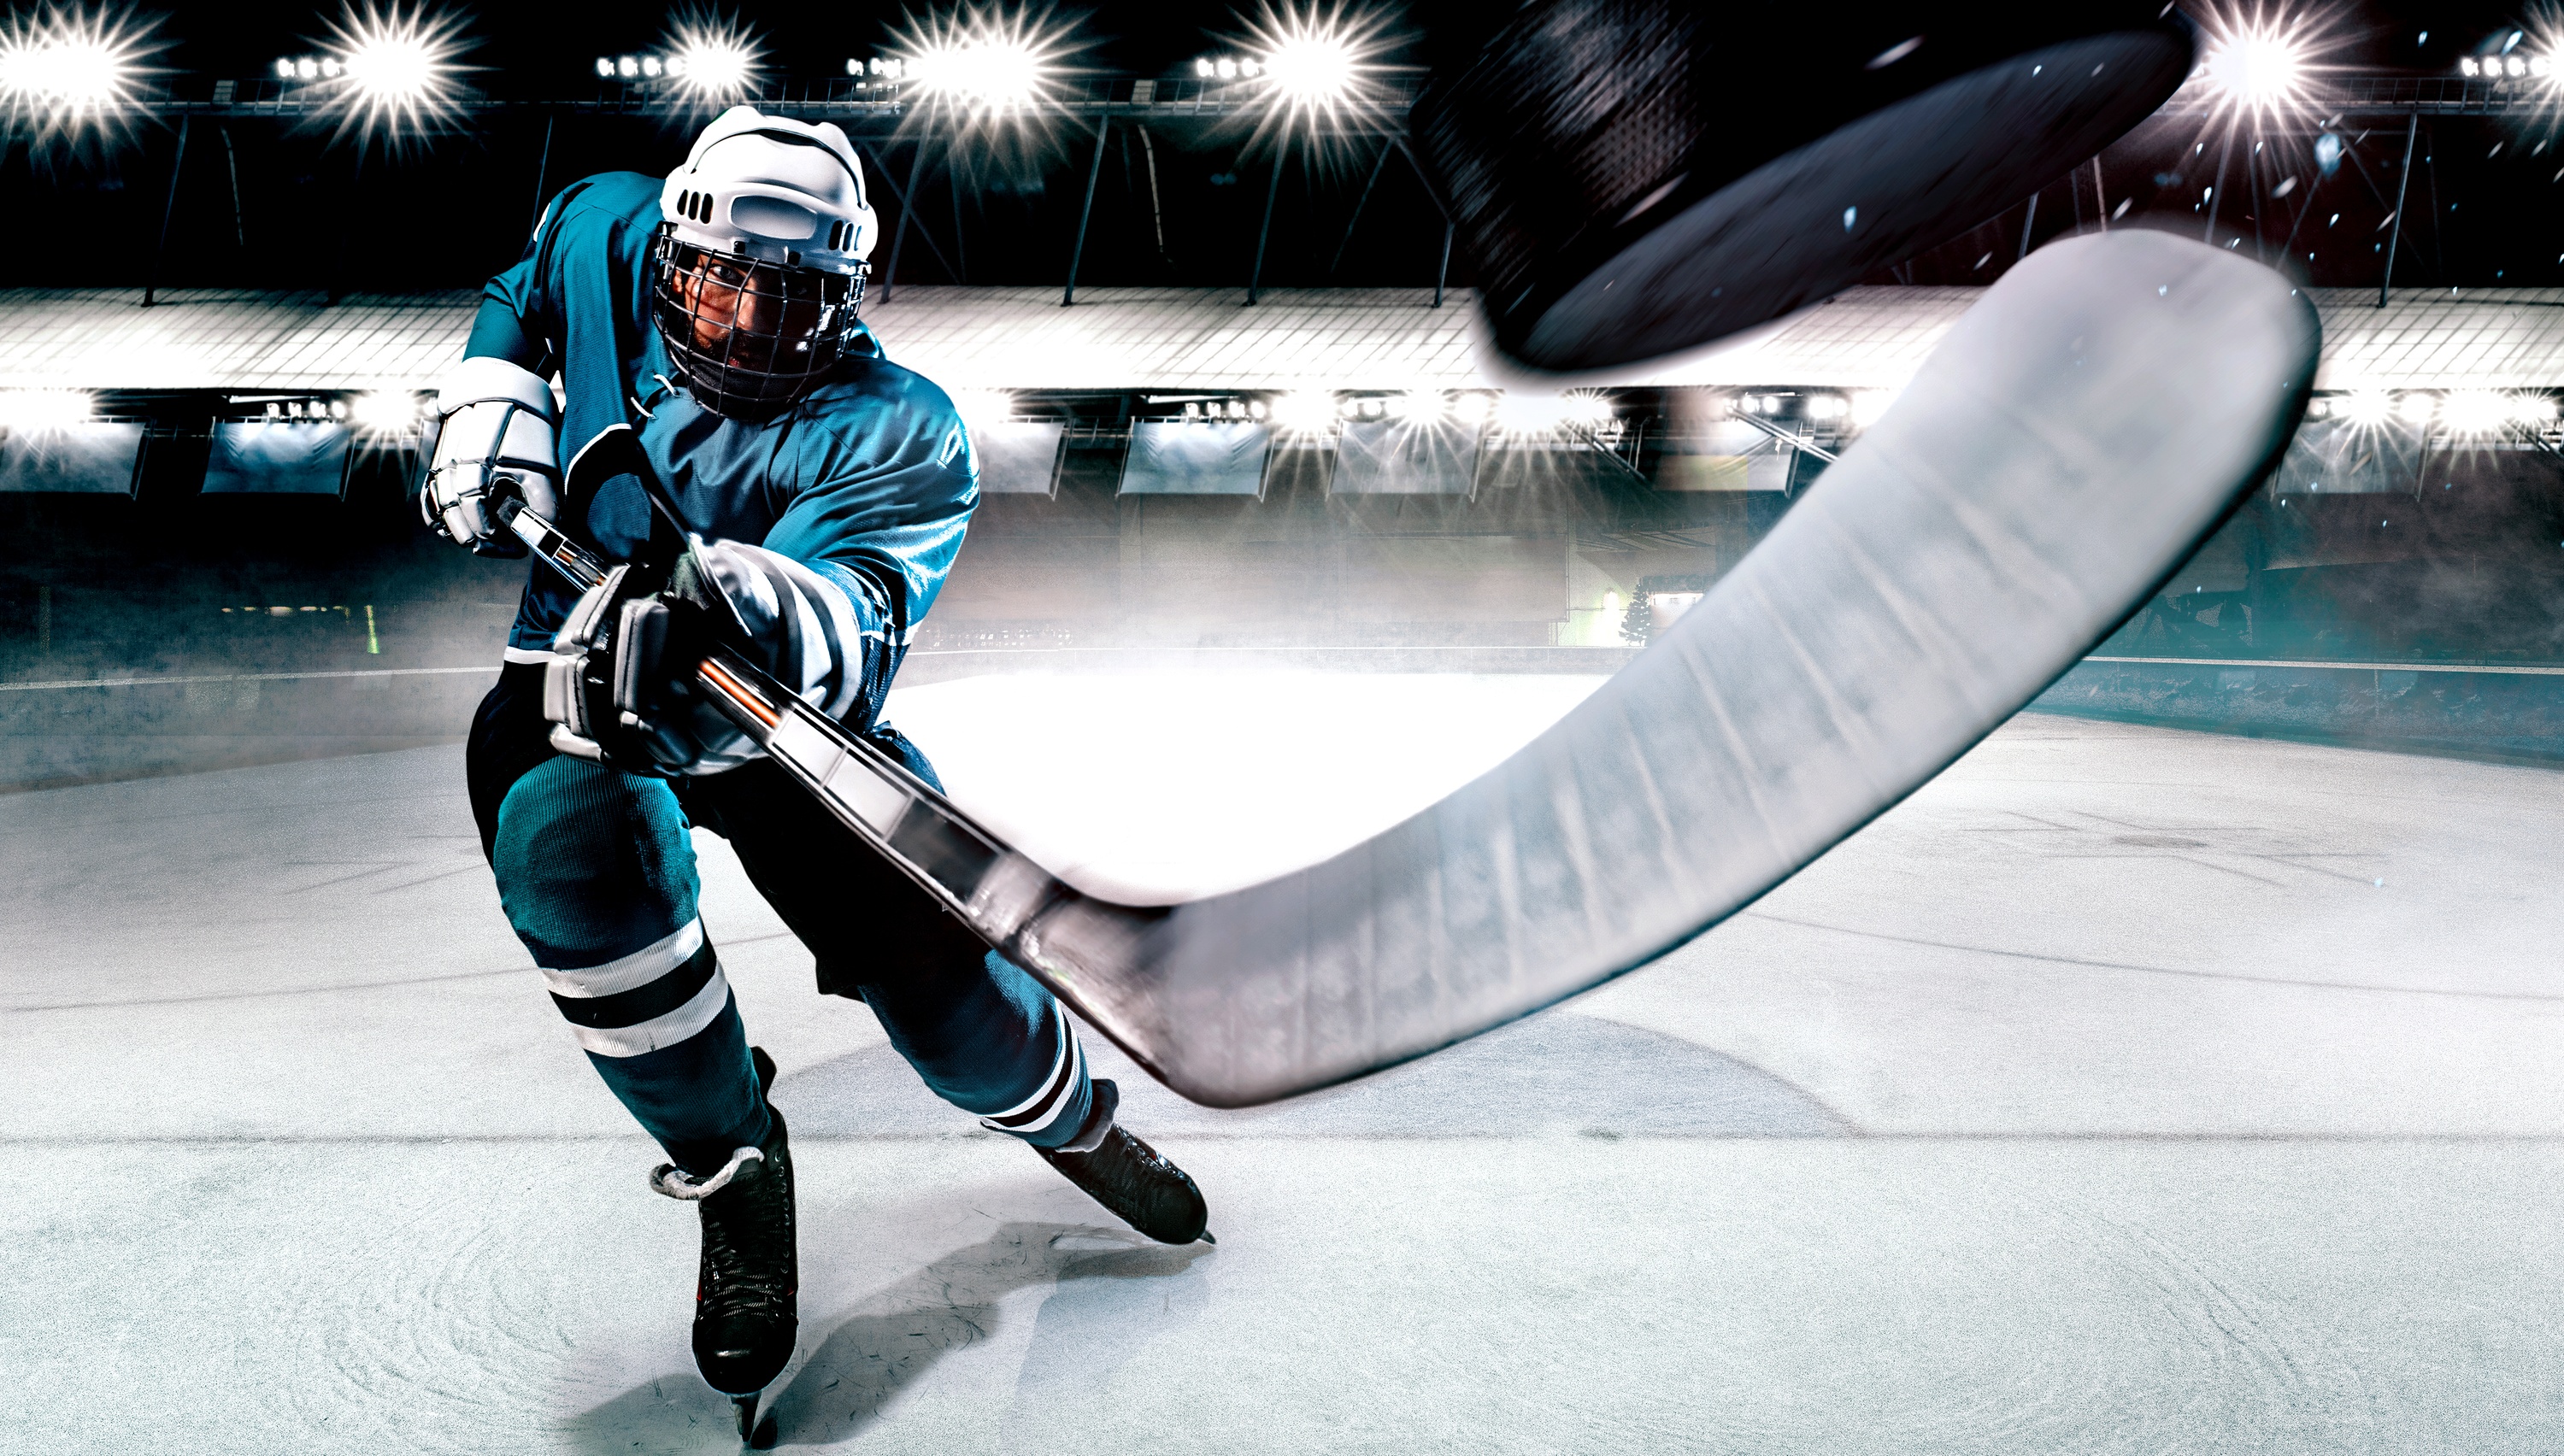 hockey player on the ice - large hockey stick facing towards viewer